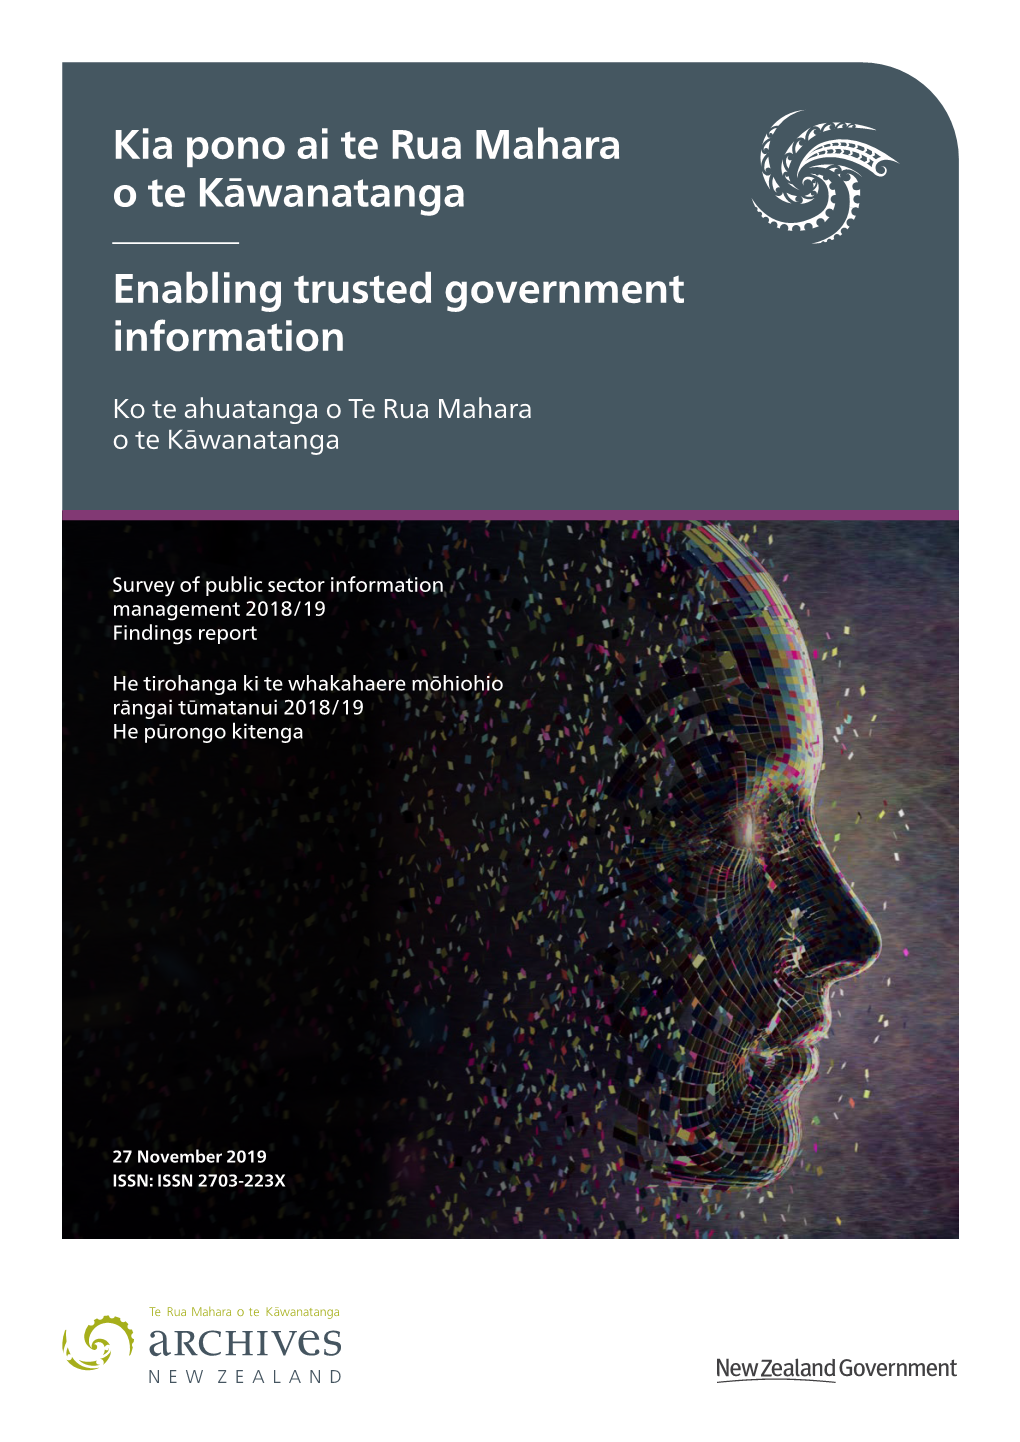 Survey of Public Sector Information Management 2018/19 Findings Report